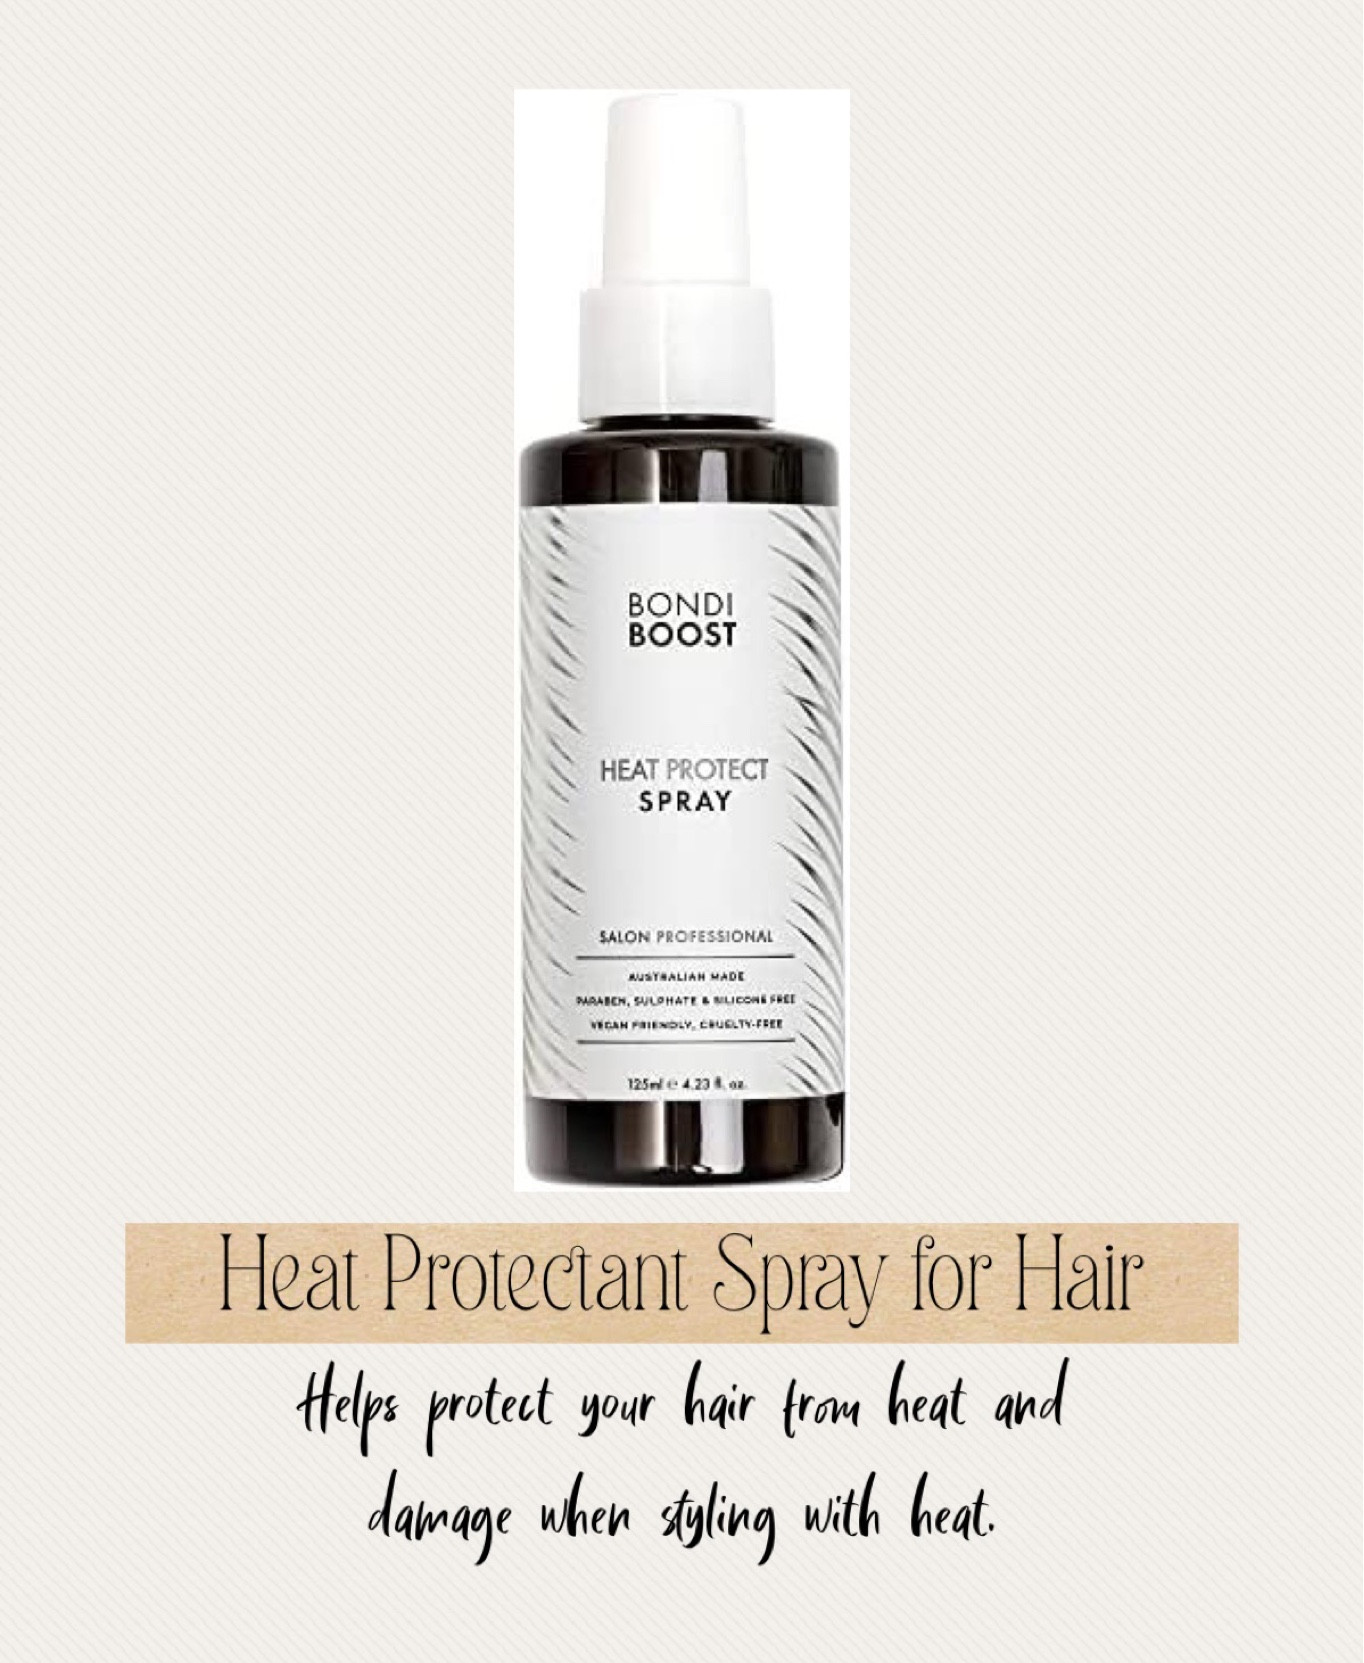 BondiBoost Thermal and Heat Protectant Hair Spray